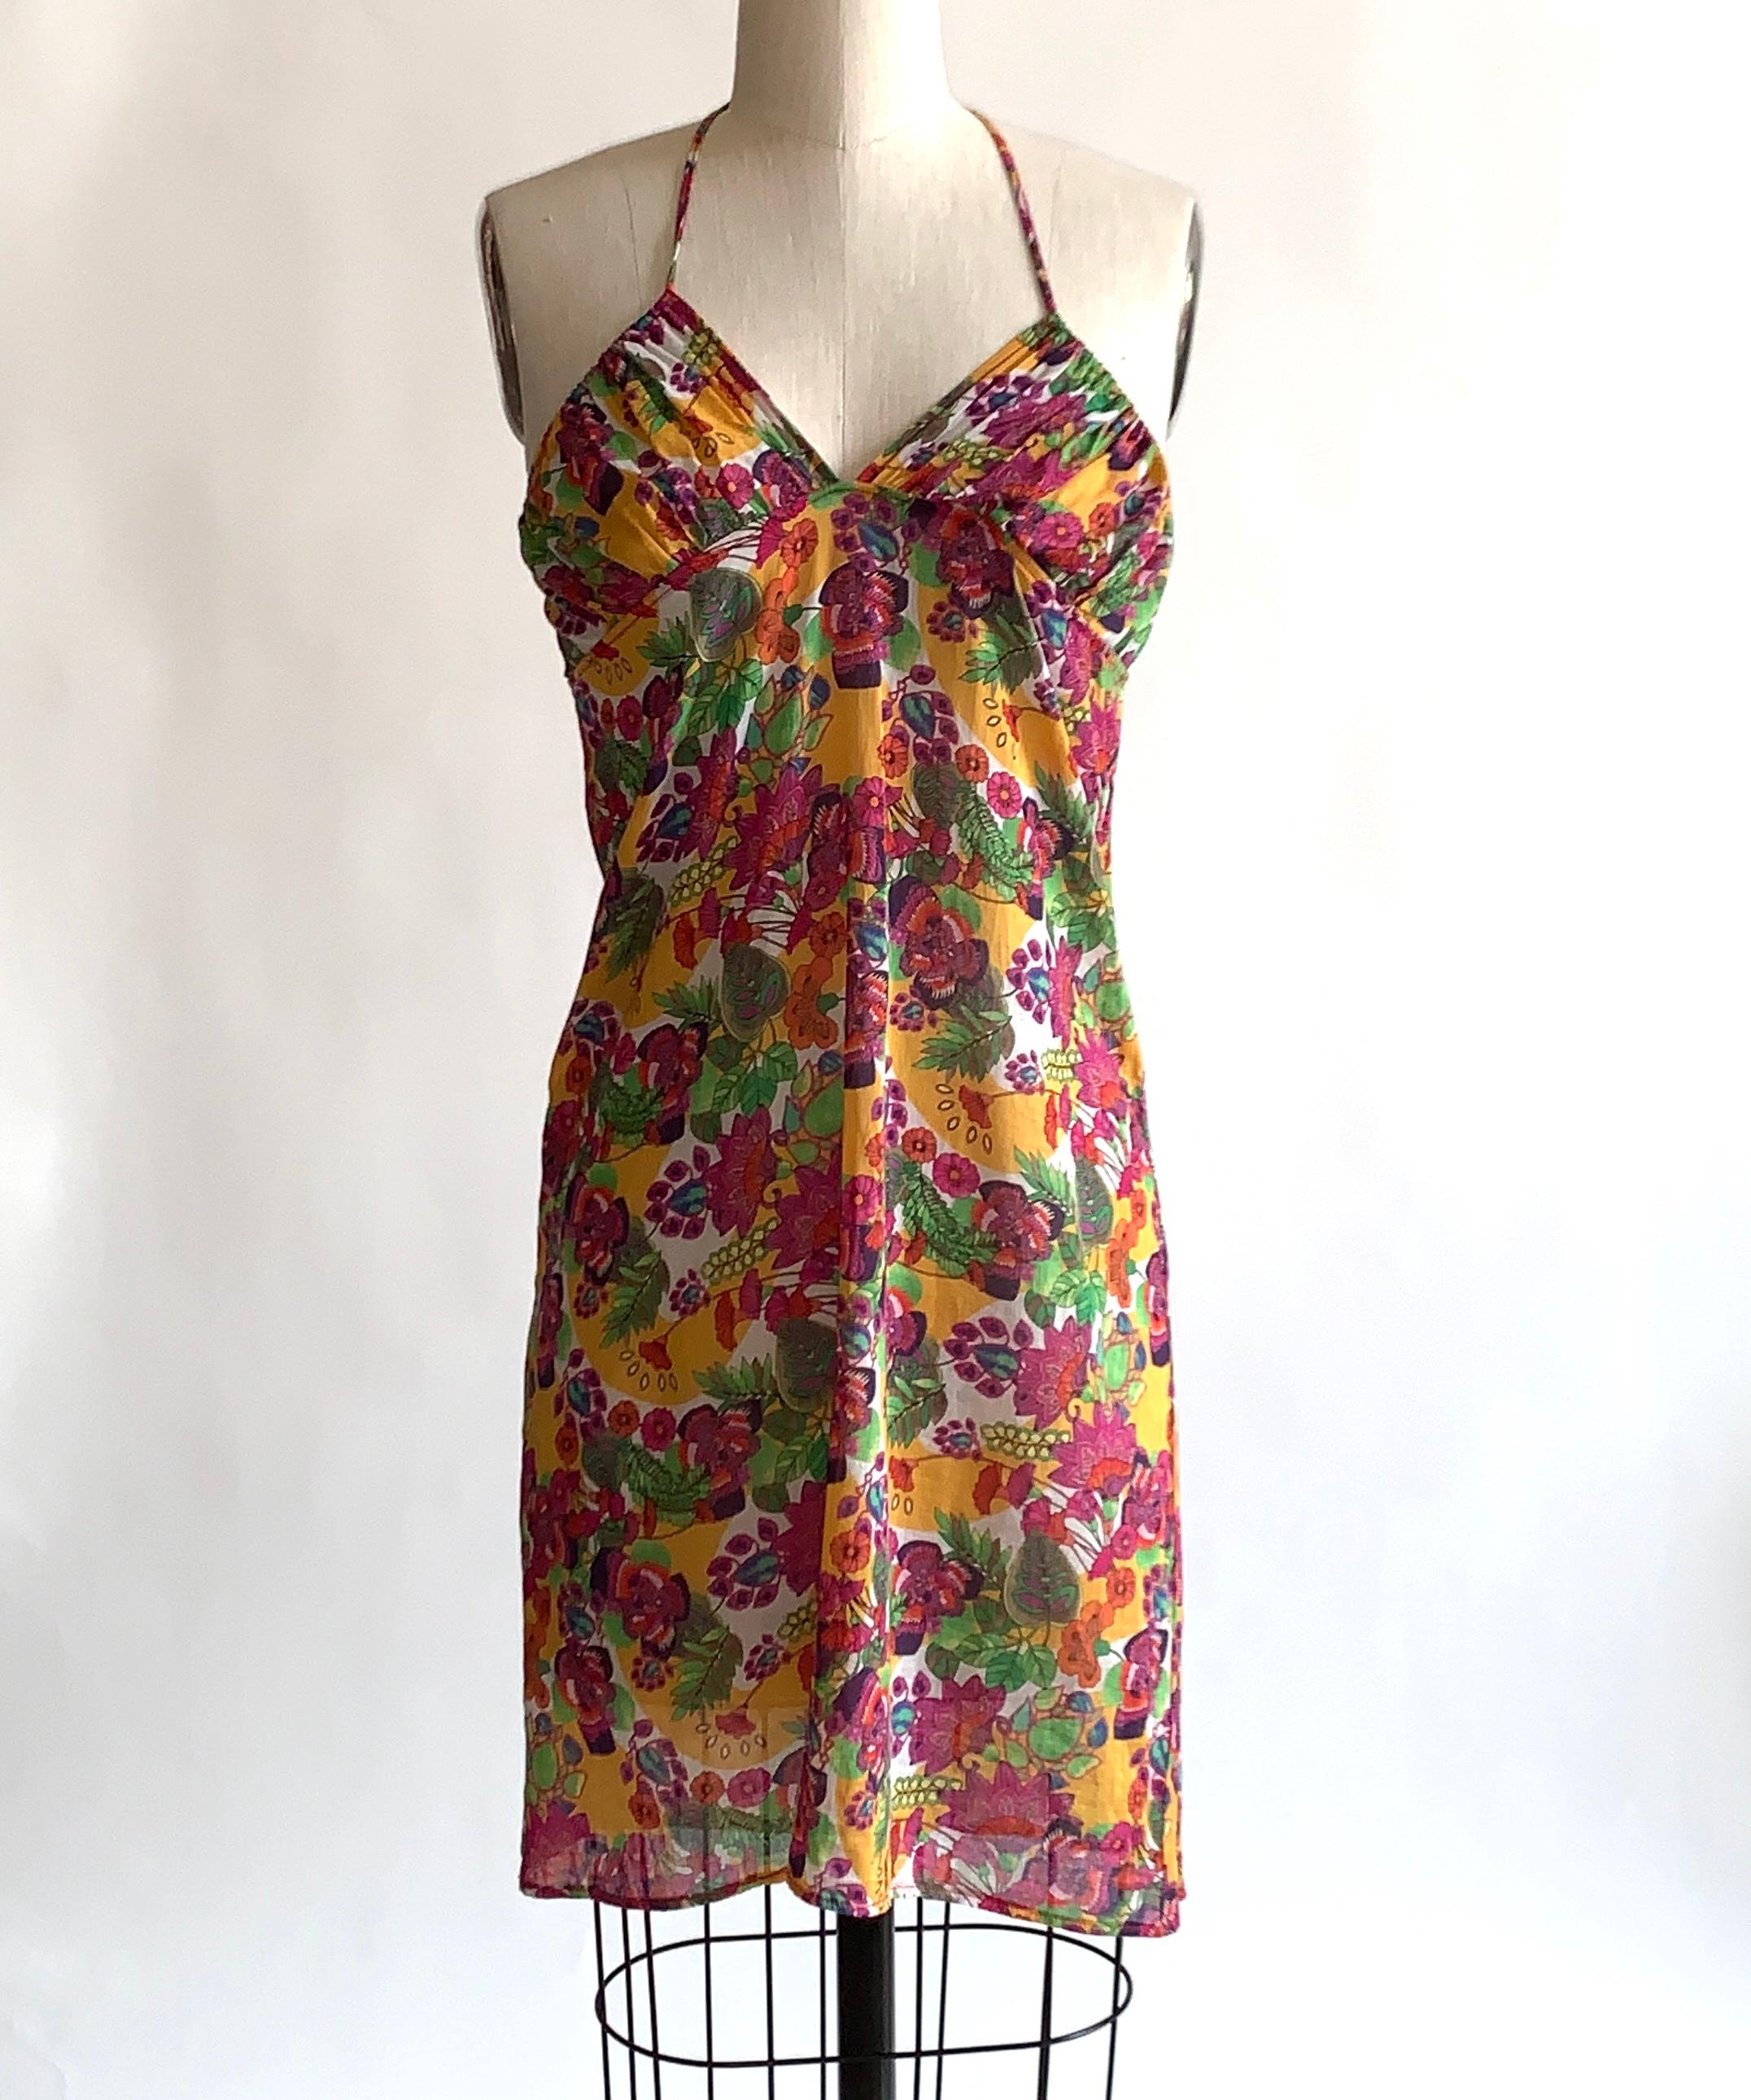 Christian Dior Boutique 2000's golden yellow swim coverup skirt with purple, red and green stylized floral print throughout. Can be worn as drawstring waist skirt or as a halter if you have a smaller neck! The super light cotton makes this perfect